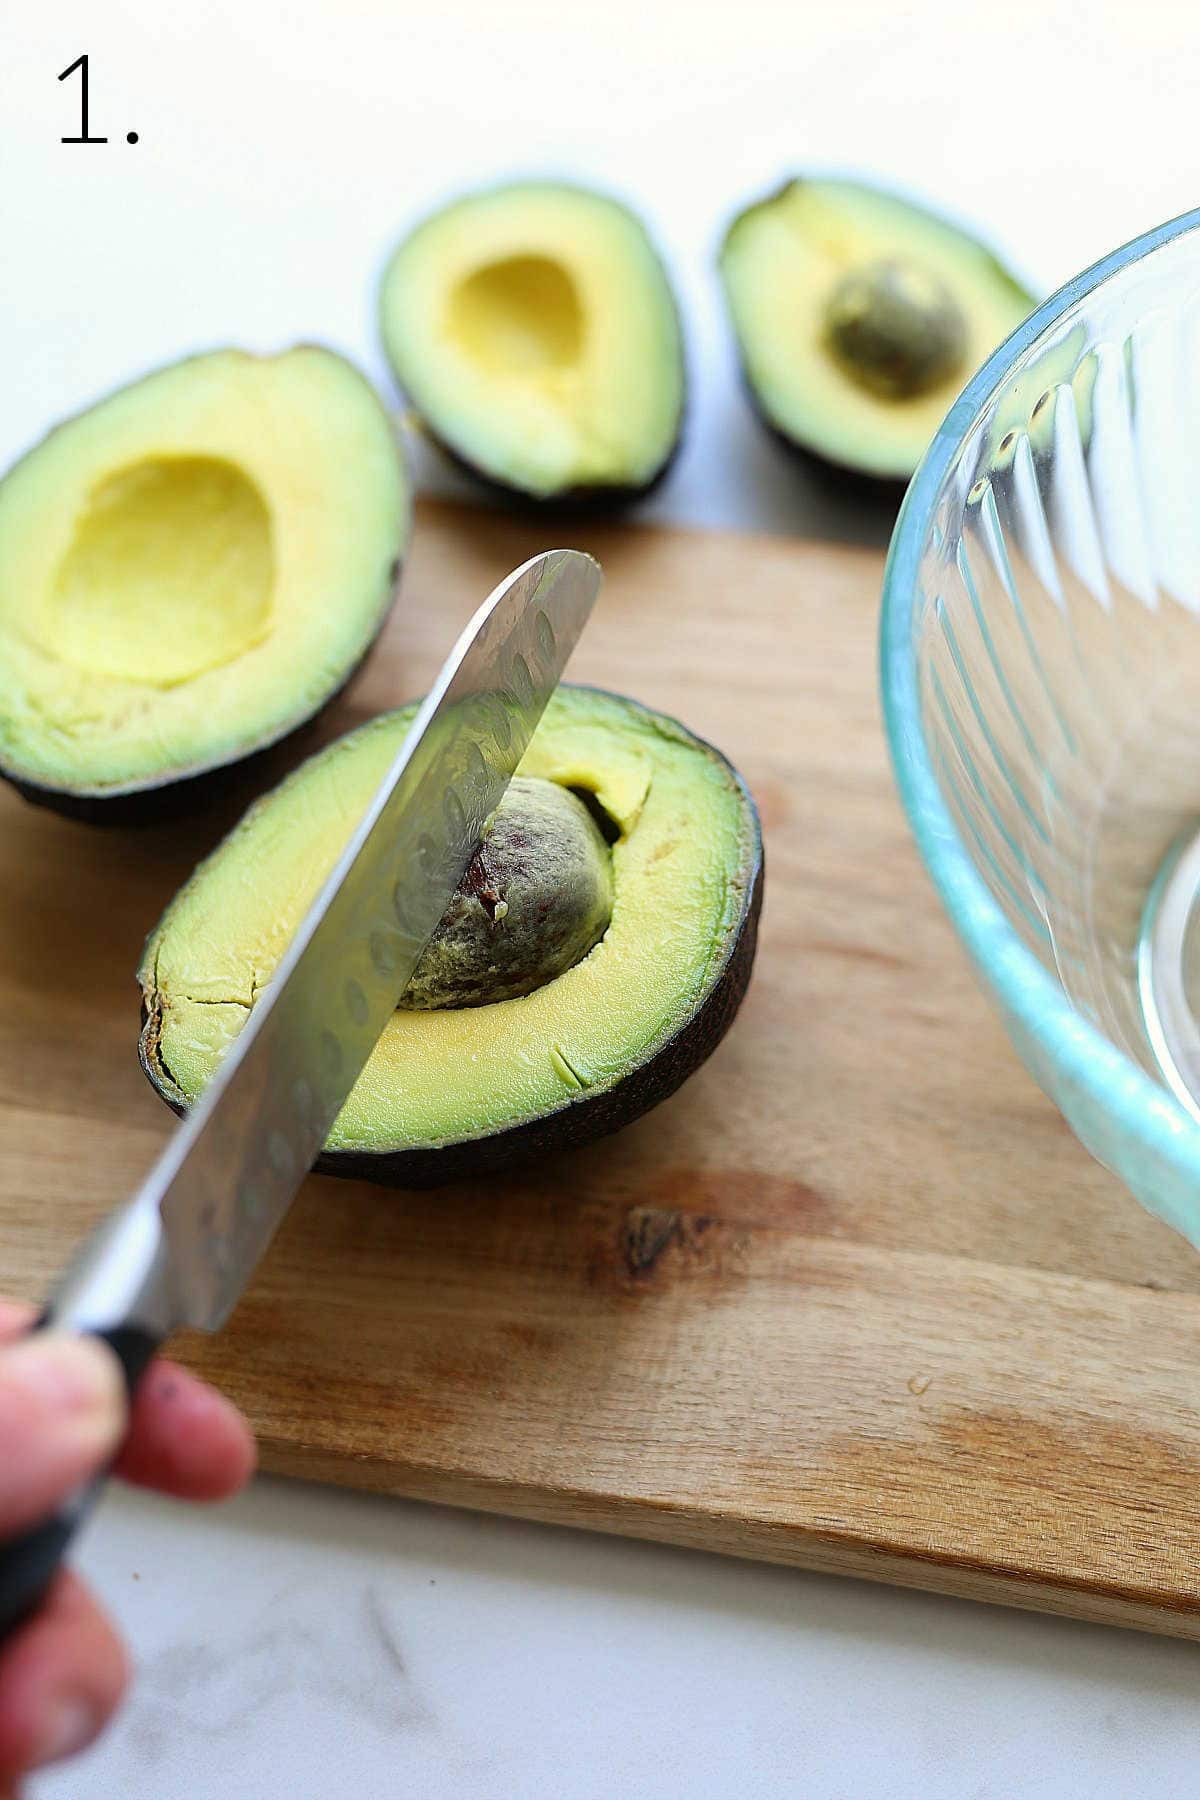 Slicing Avocado with a Knife and Removing the Seed.